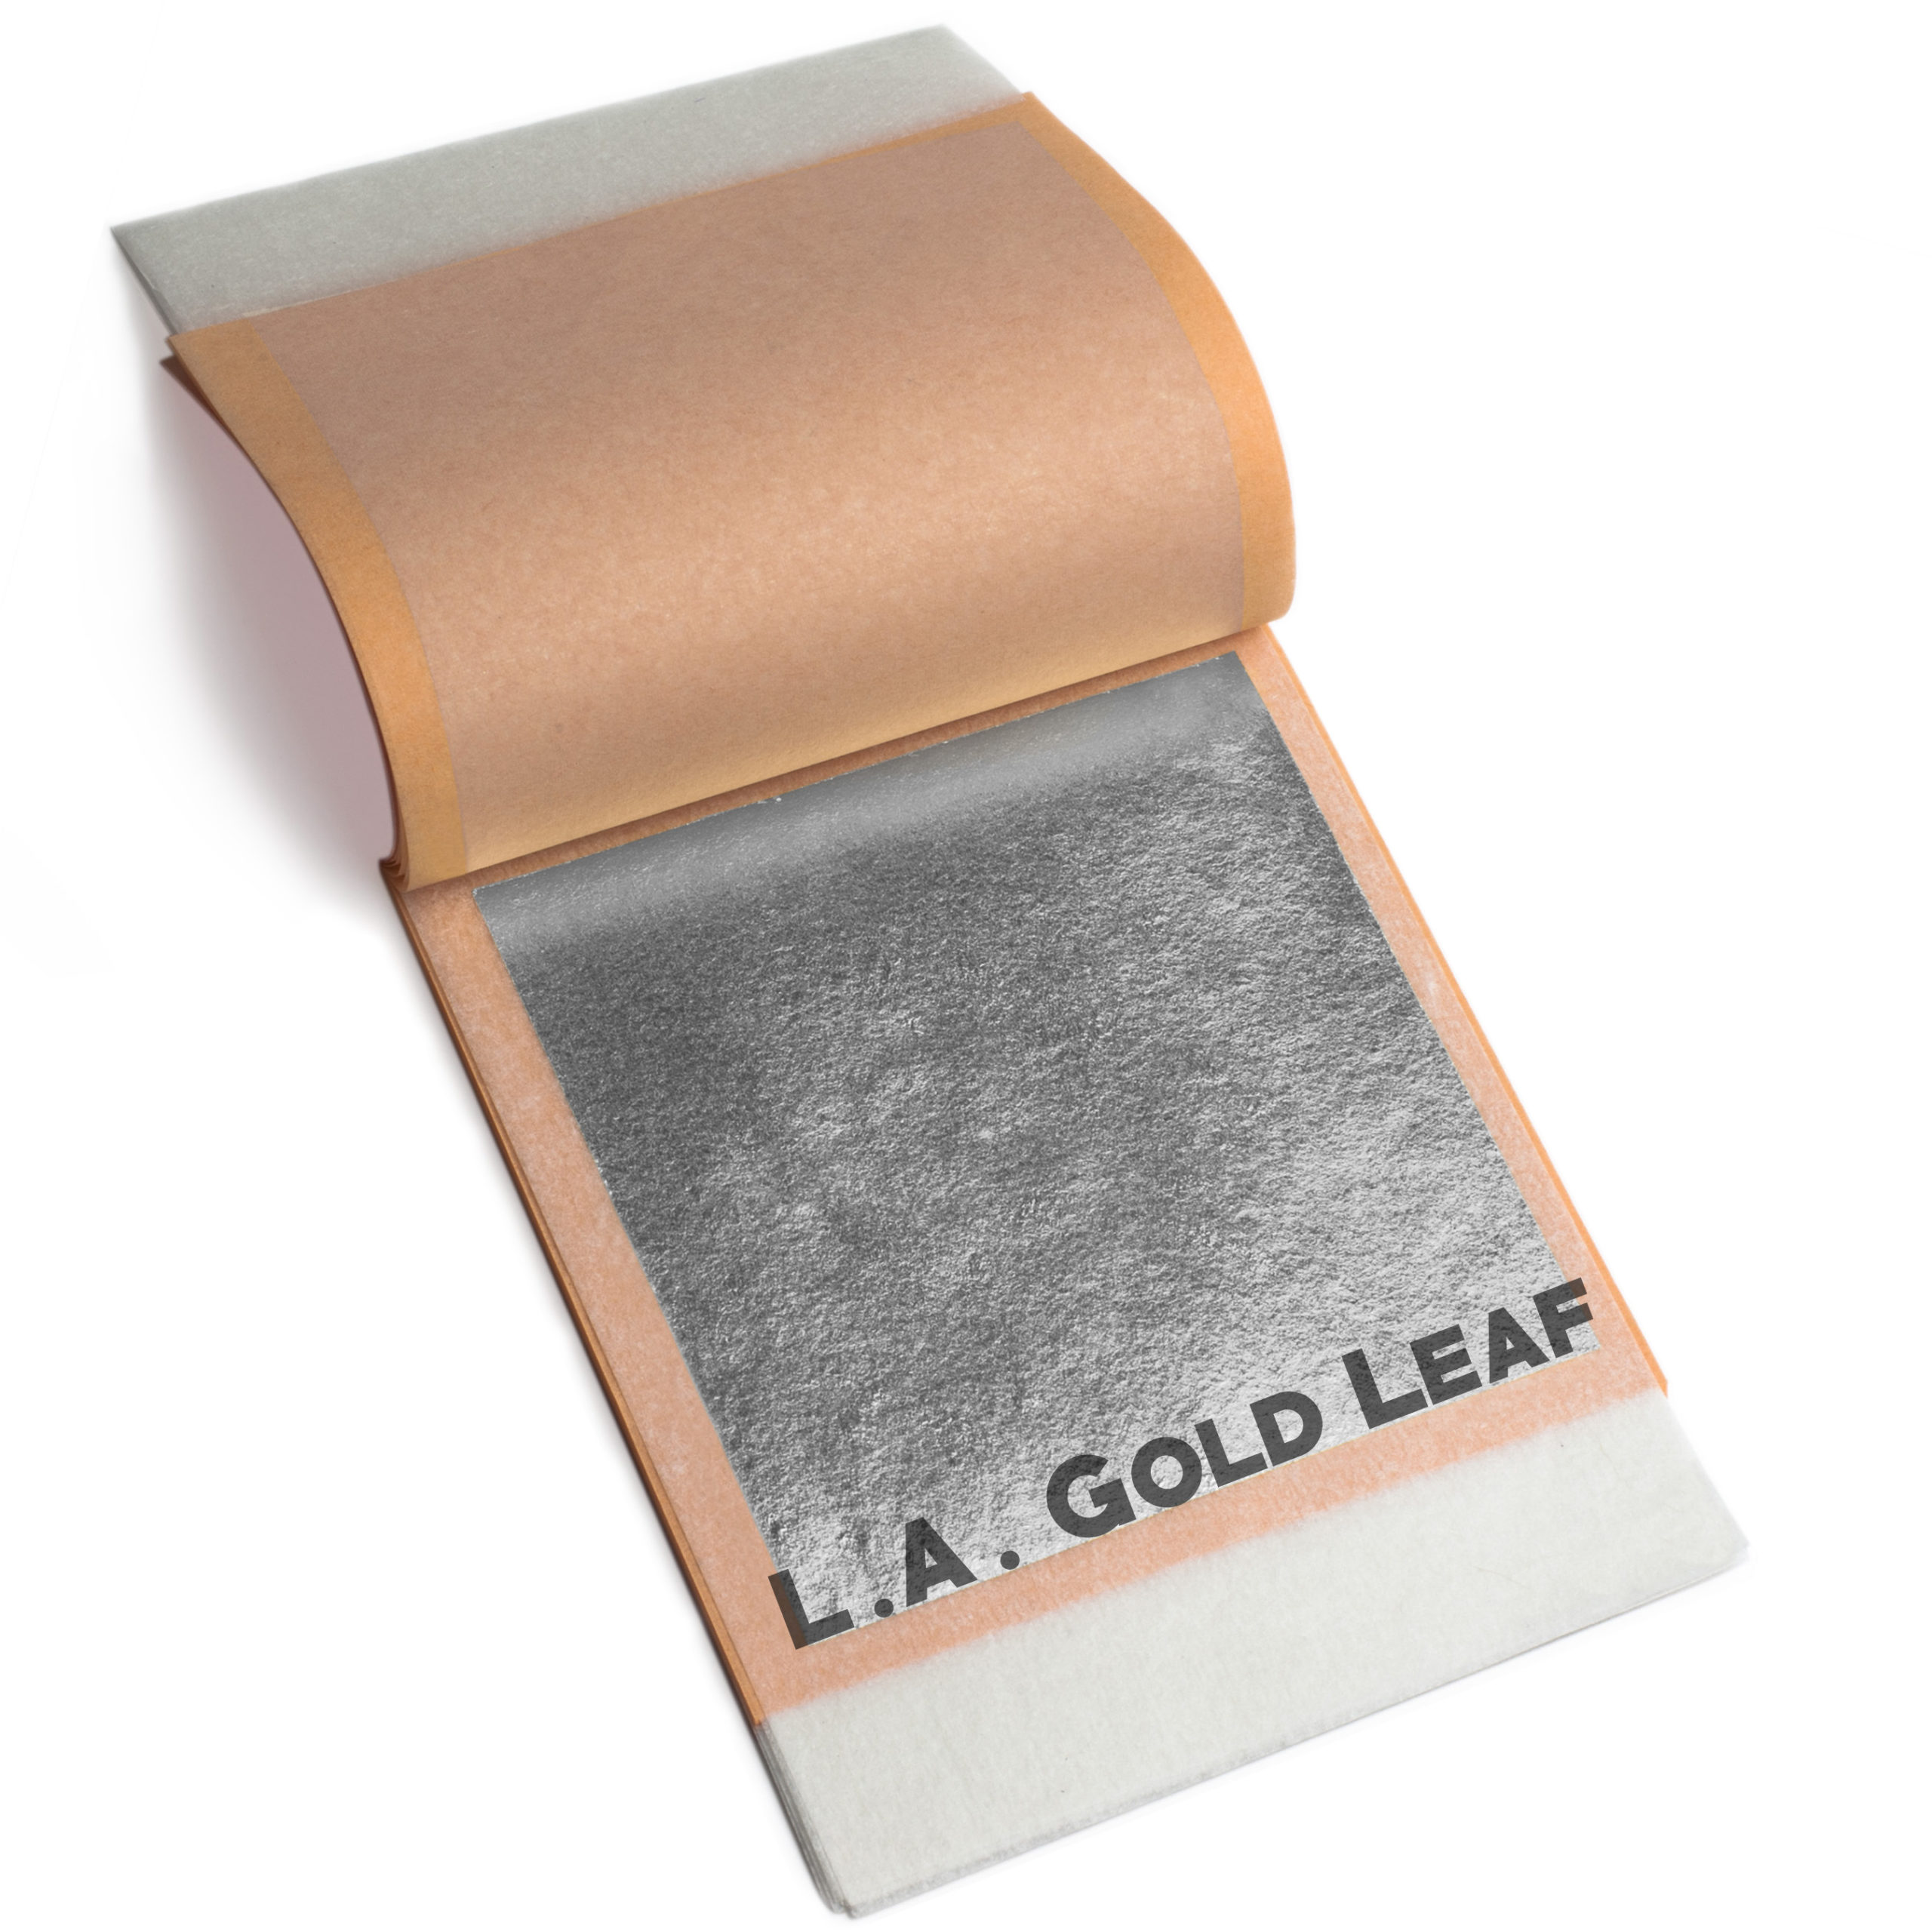 Imitation Gold or Silver Leaf & Adhesive Pack - Kit 500